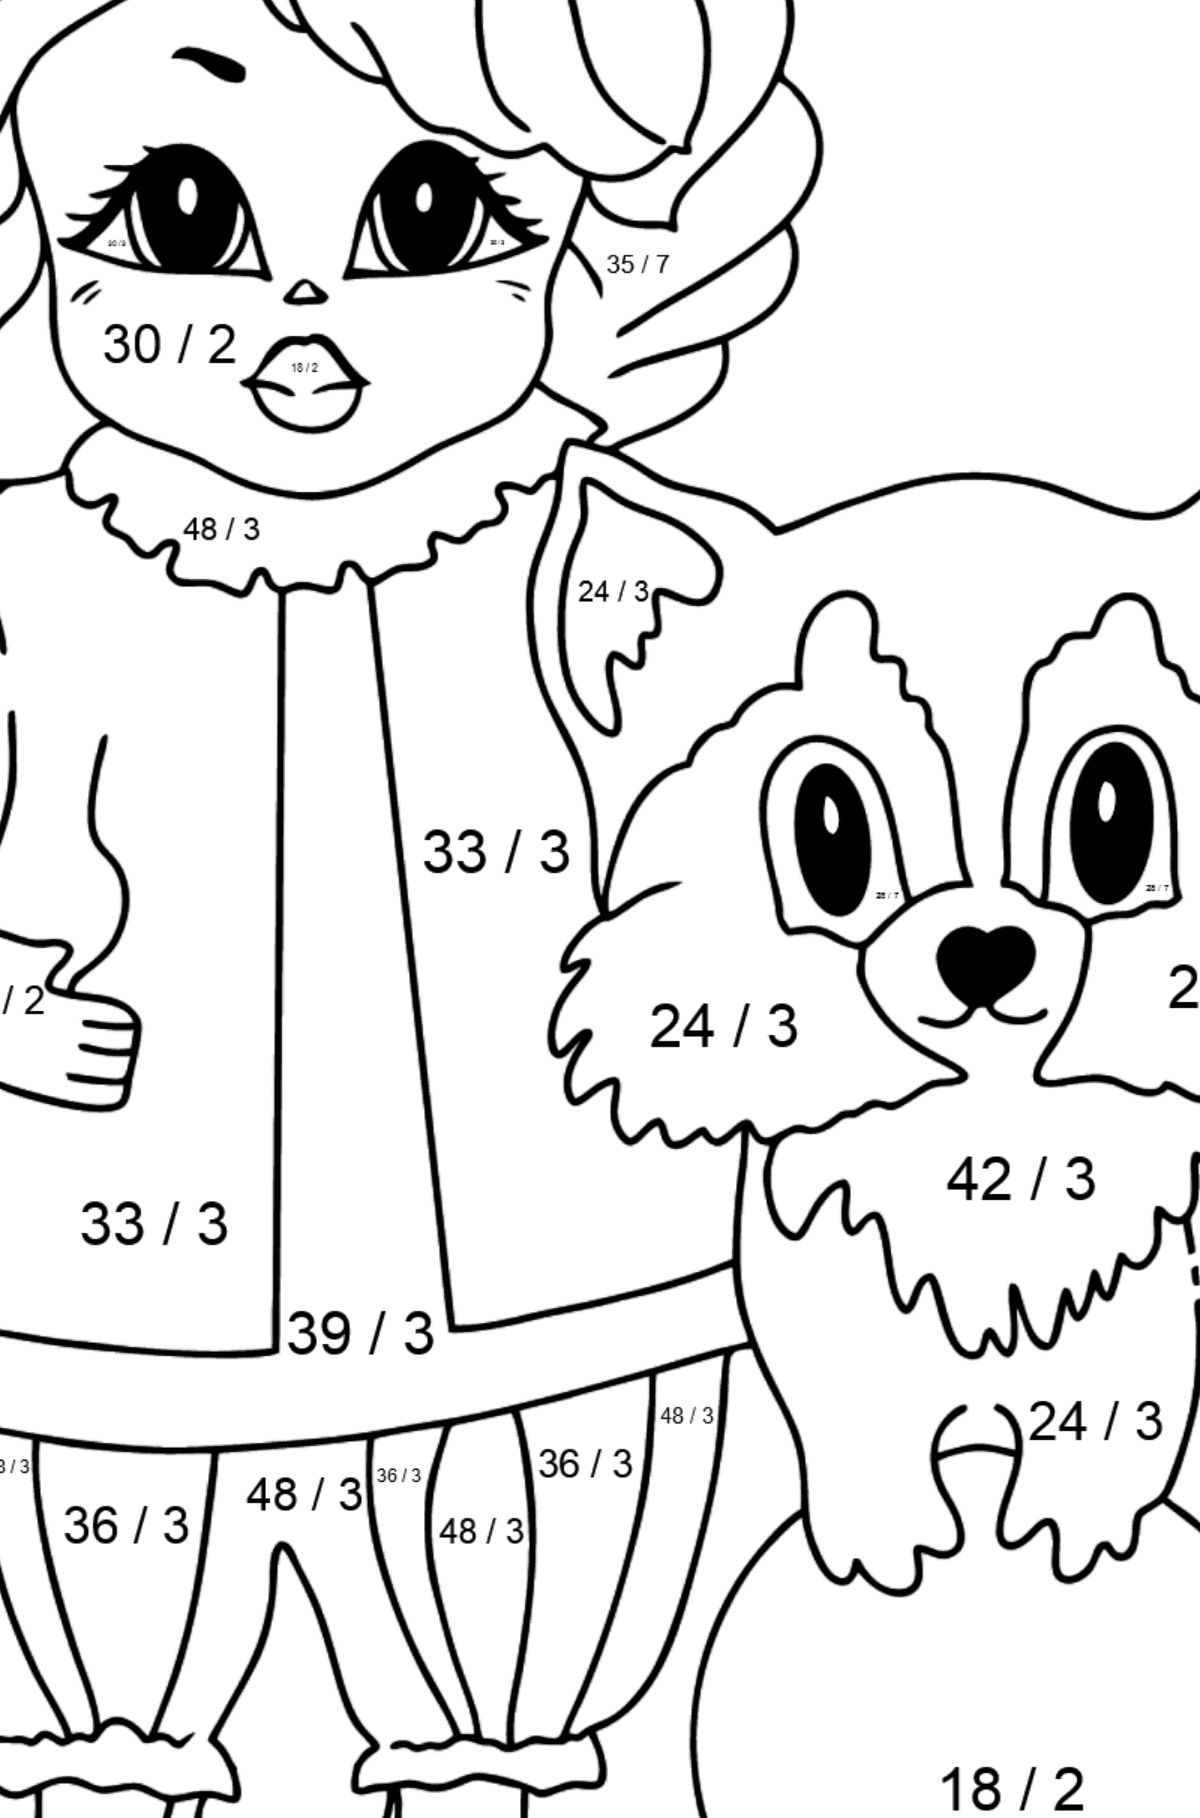 Coloring Page - A Princess with a Cat and a Racoon - Math Coloring - Division for Kids